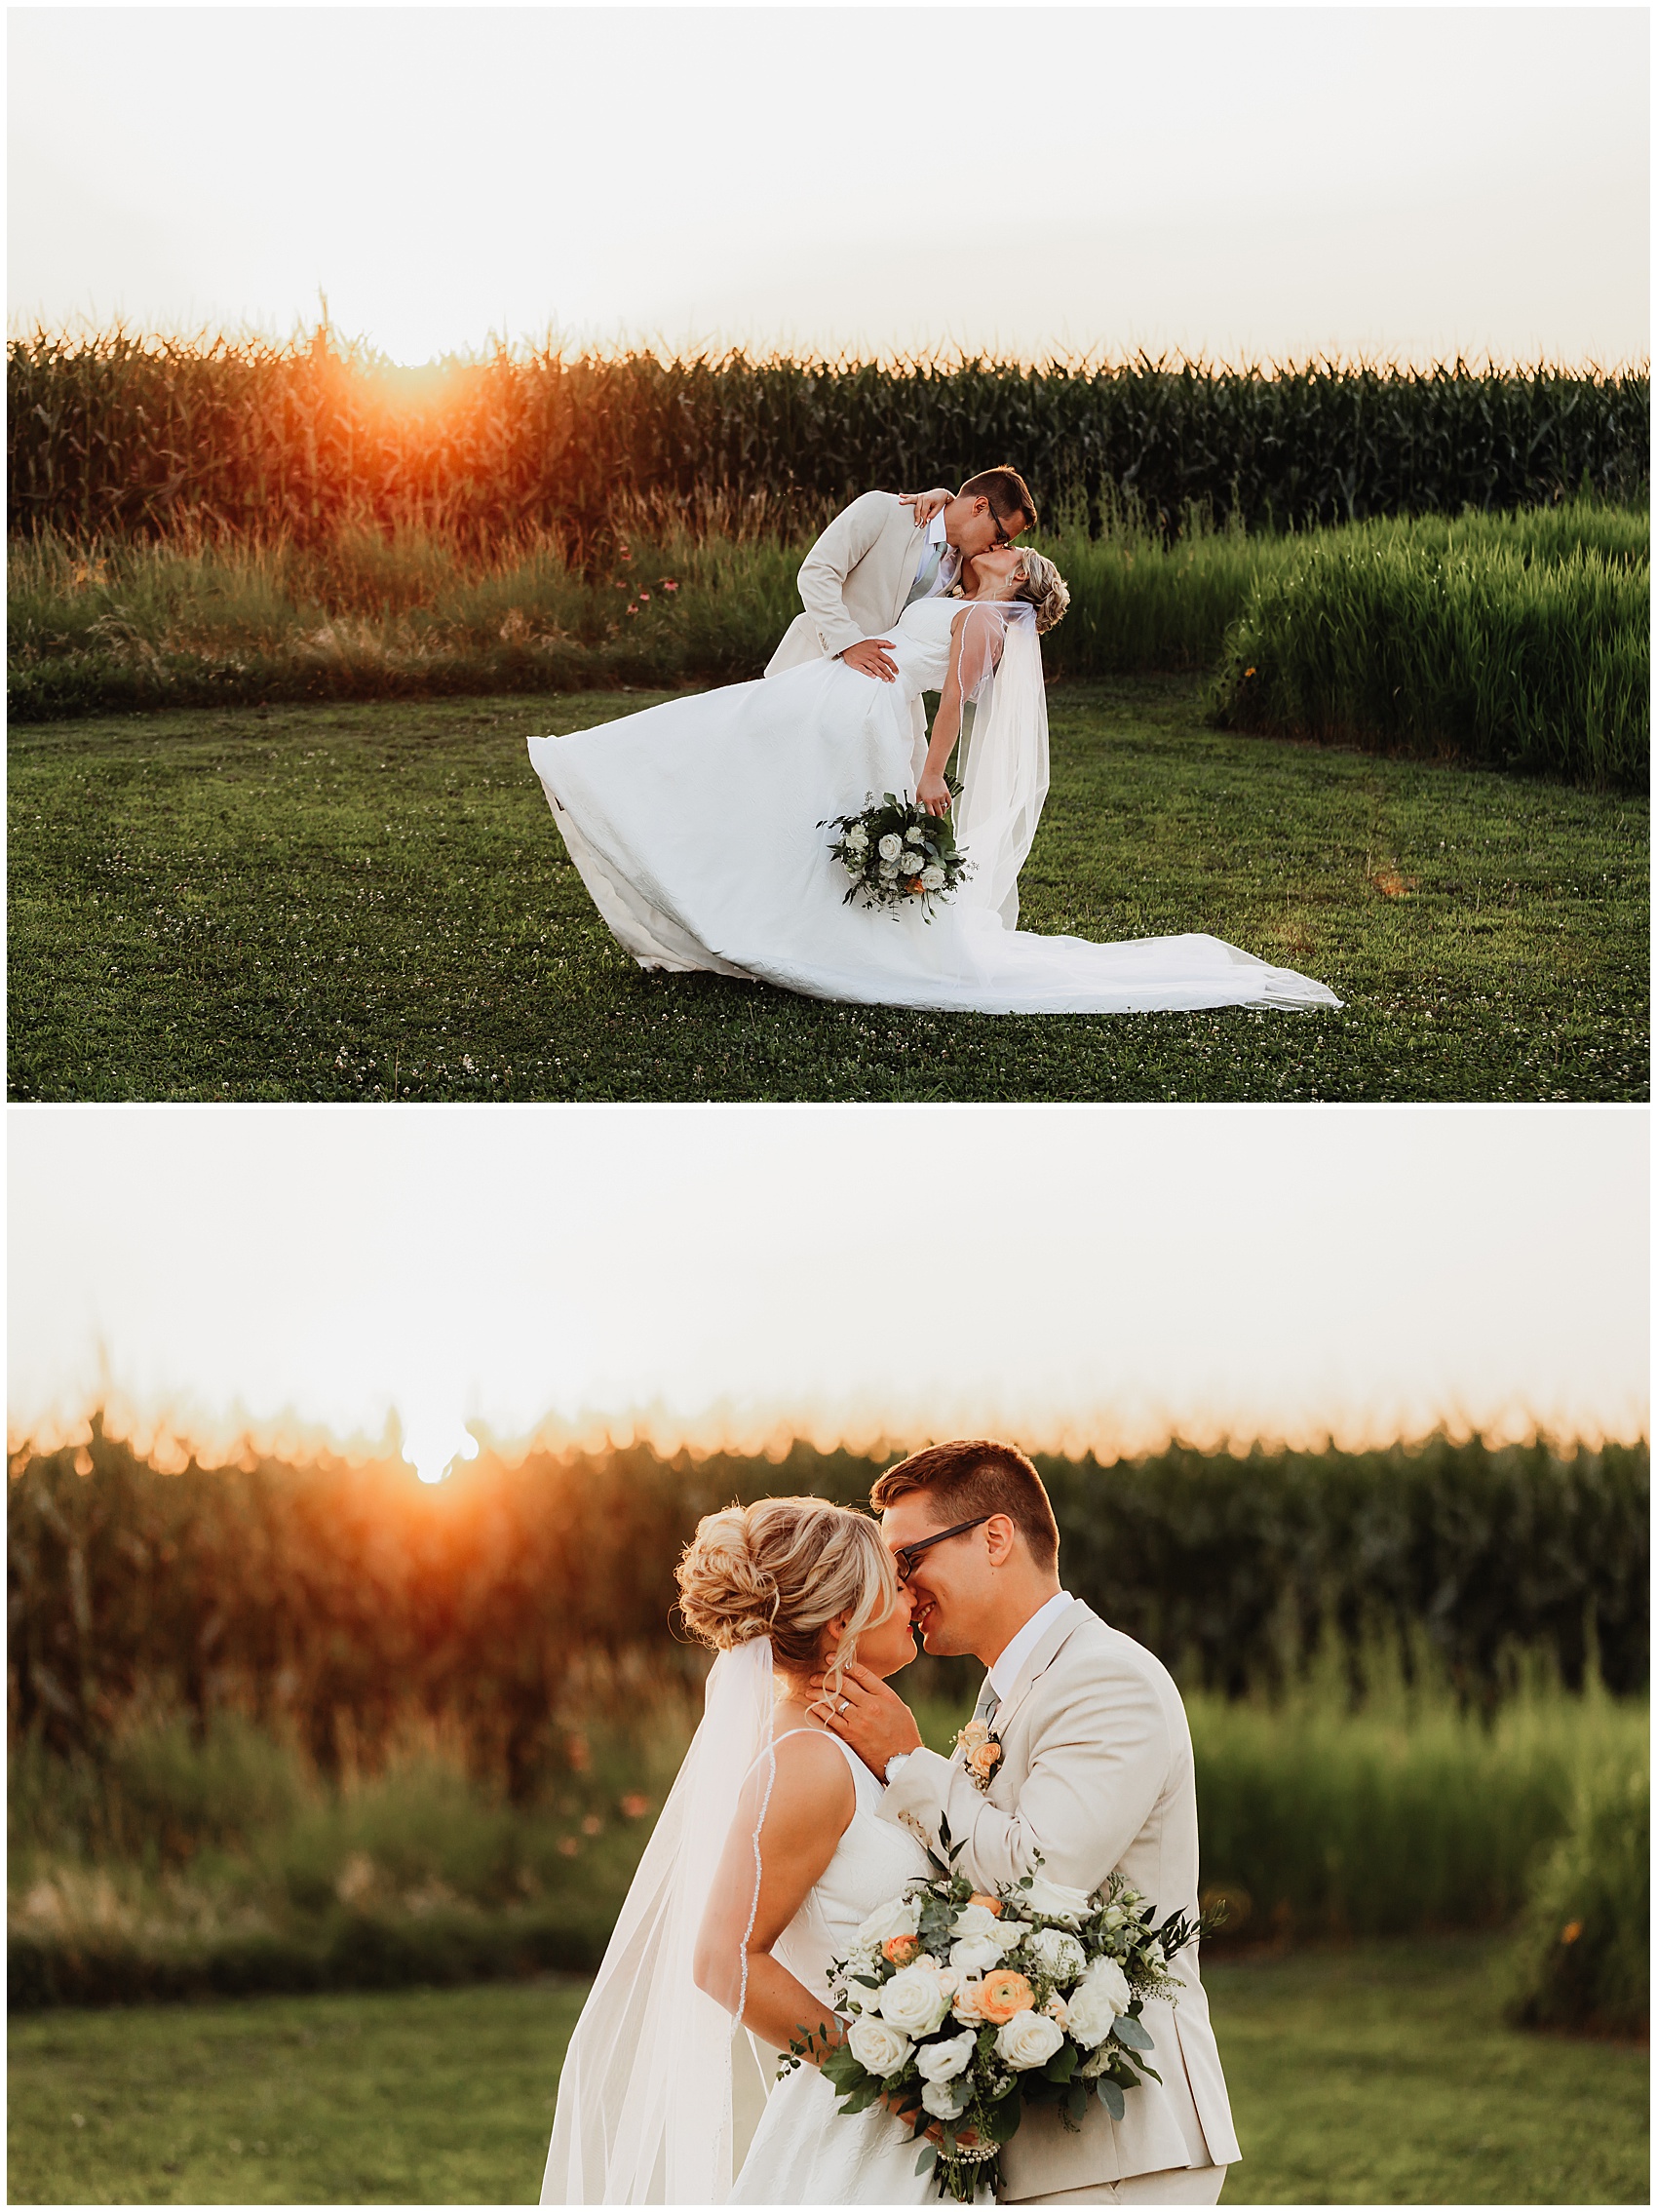 A bride and groom kiss and dip at sunset on the edge of a cornfield